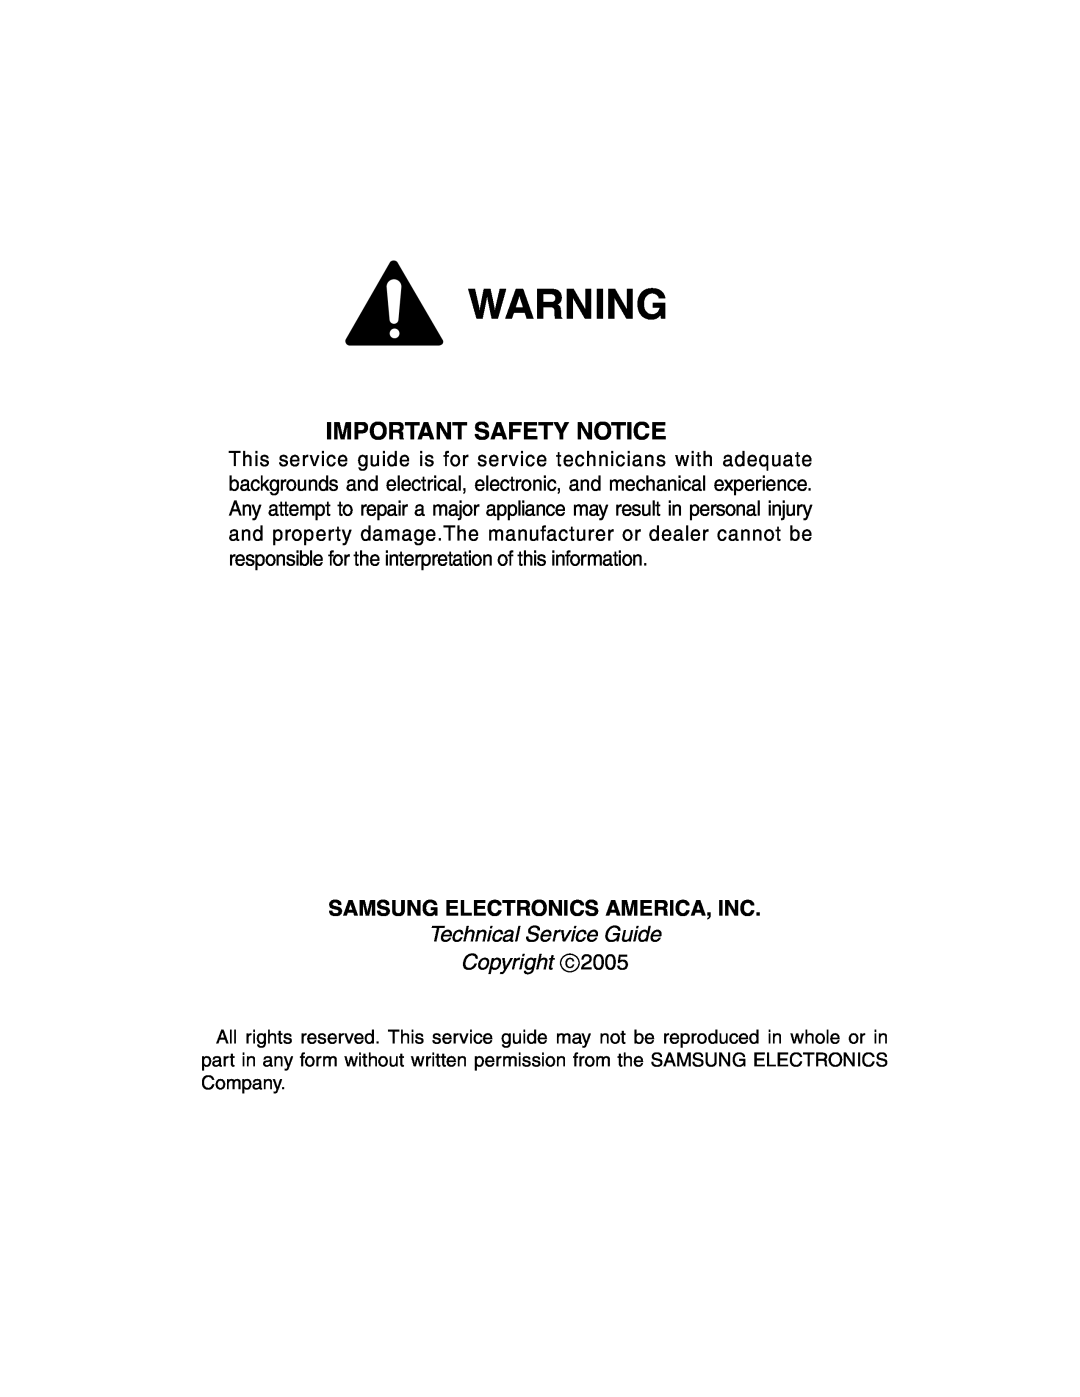 Samsung RM255BABB, RM255BASB Technical Service Guide Copyright, Important Safety Notice, Samsung Electronics America, Inc 